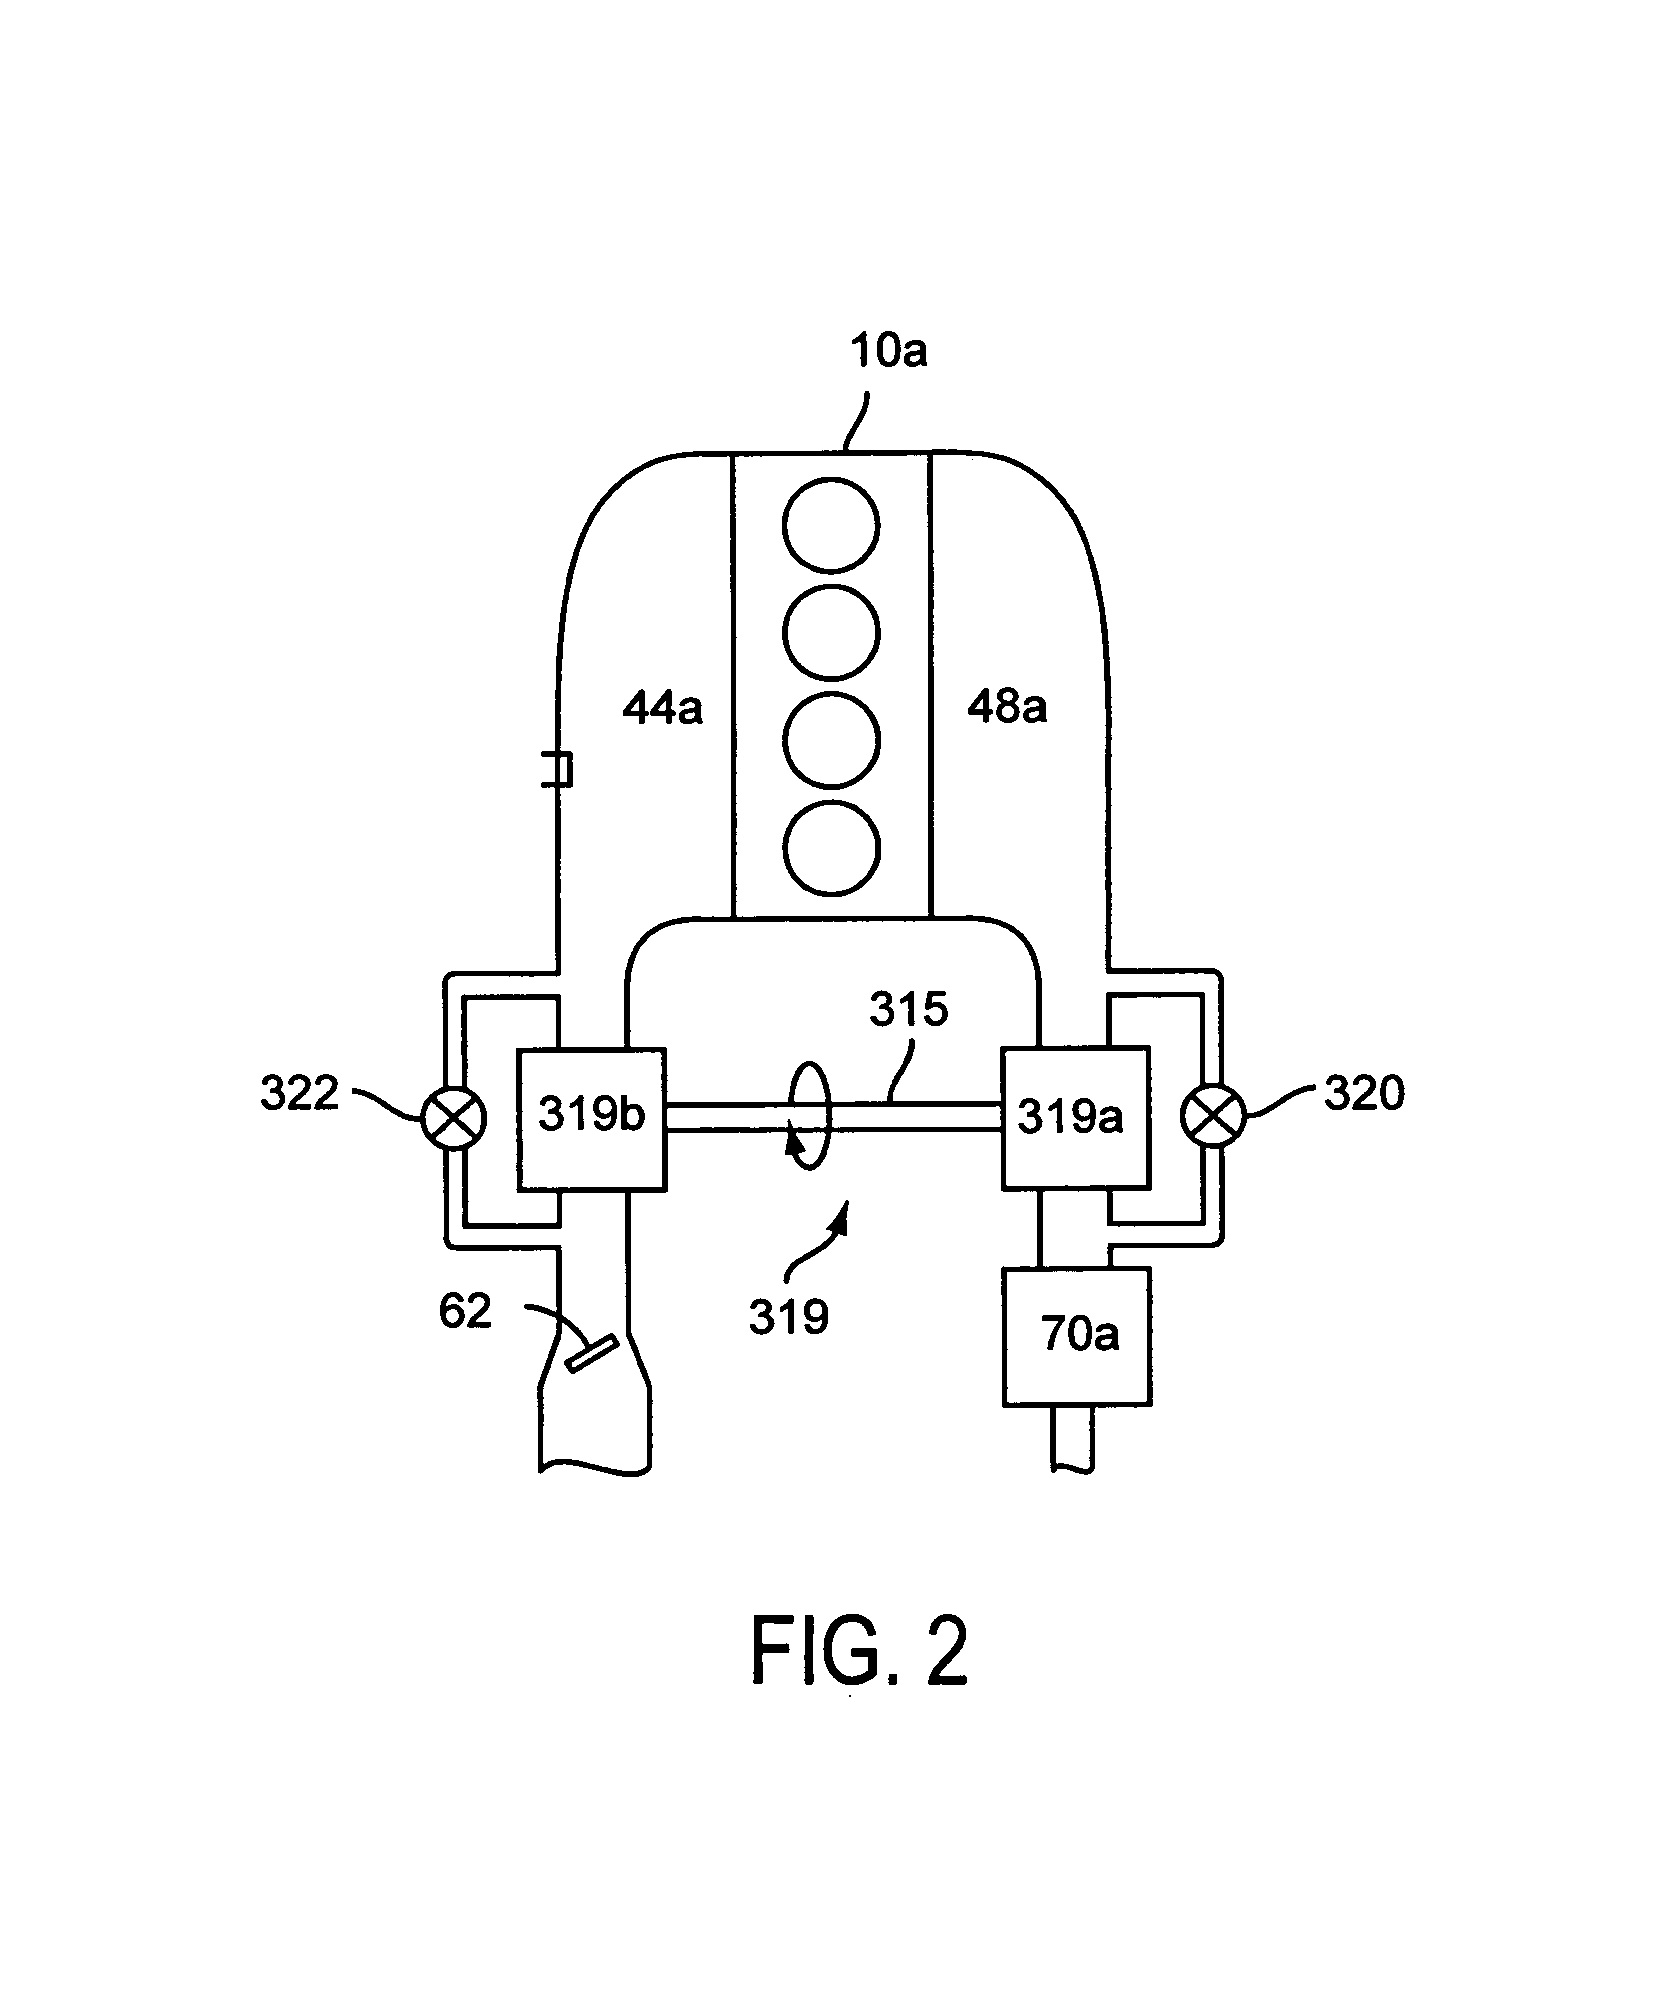 Combustion control system for an engine utilizing a first fuel and a second fuel